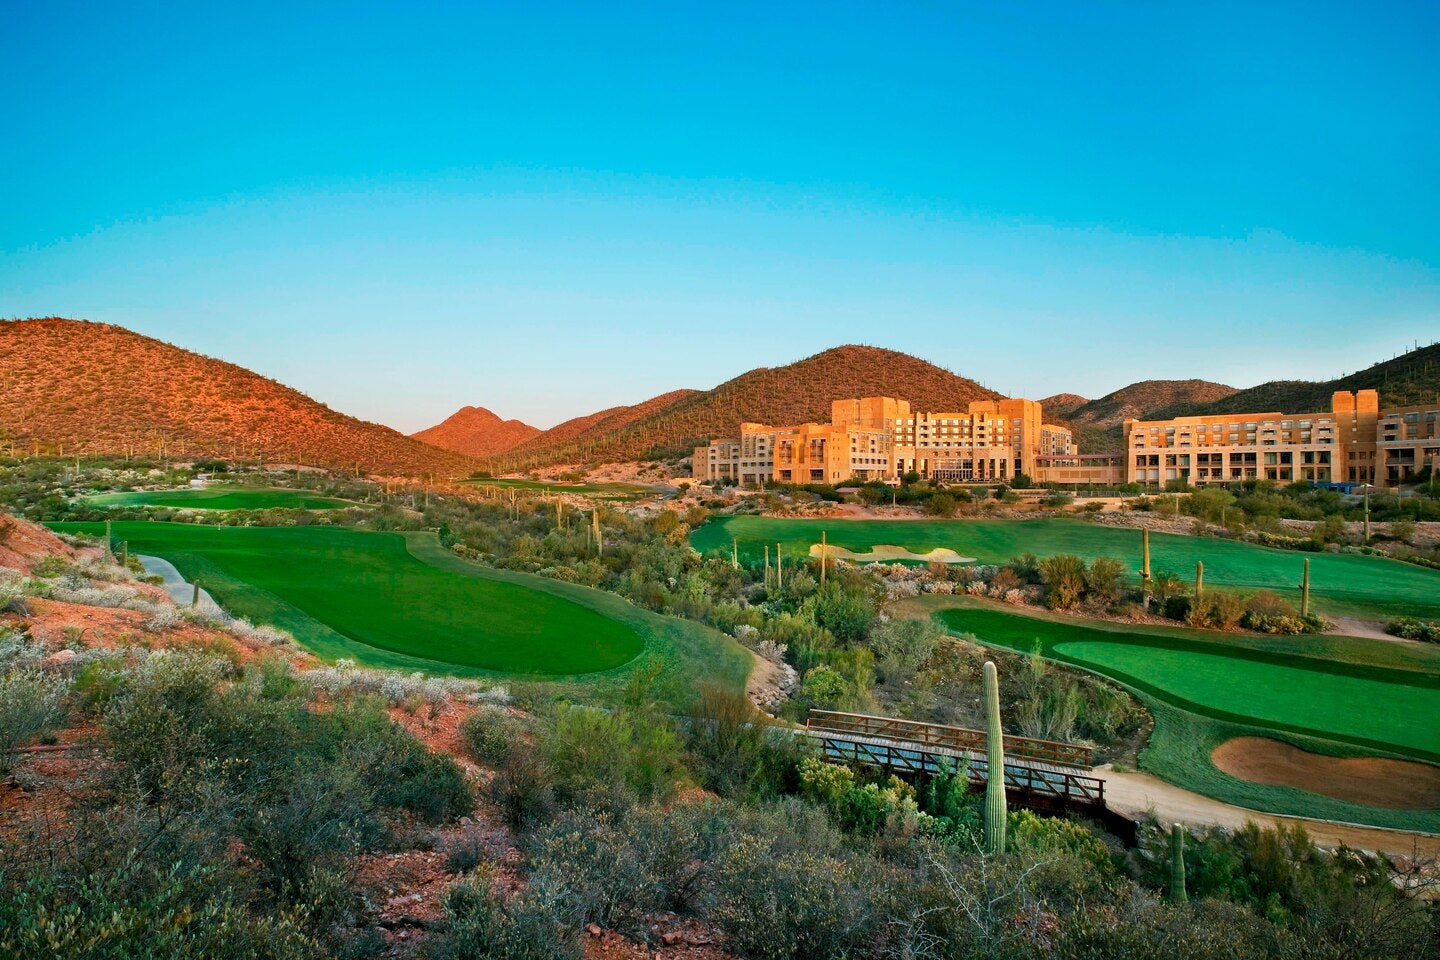 Whether you’re a fan of golf, gastronomy or art, laidback Tucson has it all